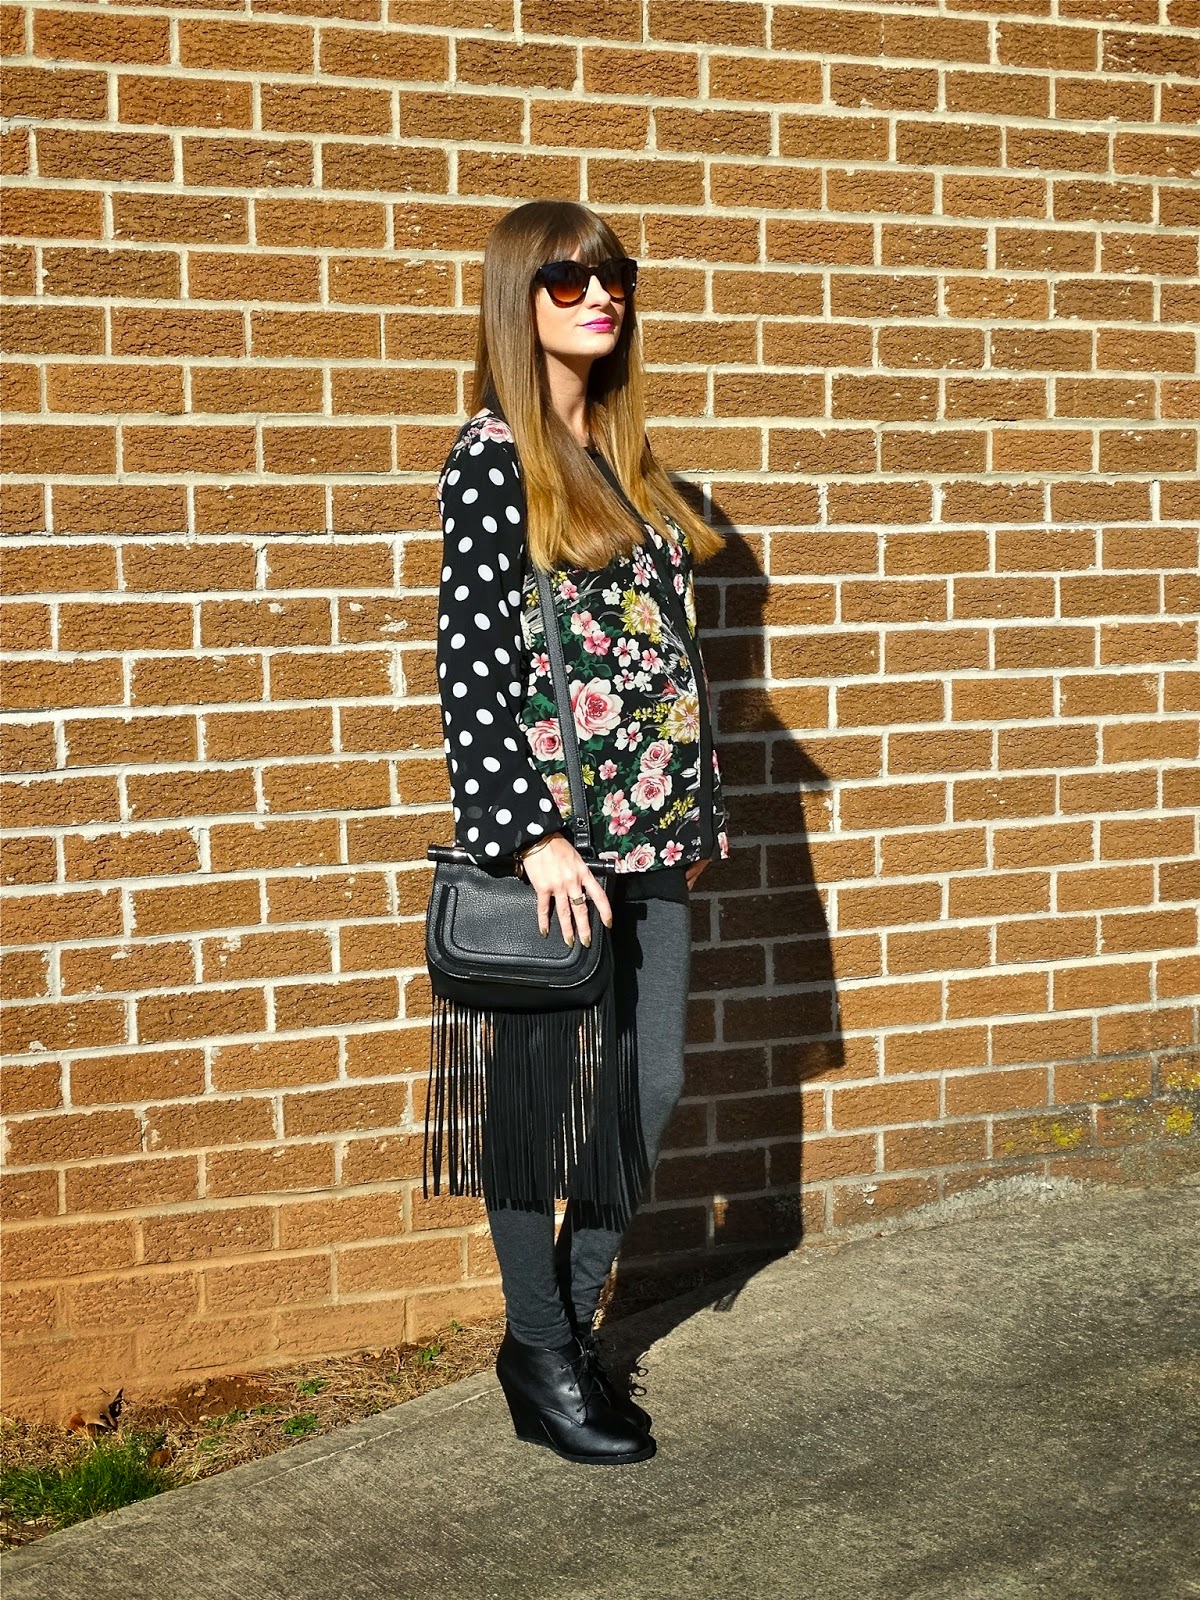 Destination Maternity leggings, LuLus*s top, Modcloth Shoes - Maternity Style on House Of Jeffers.com